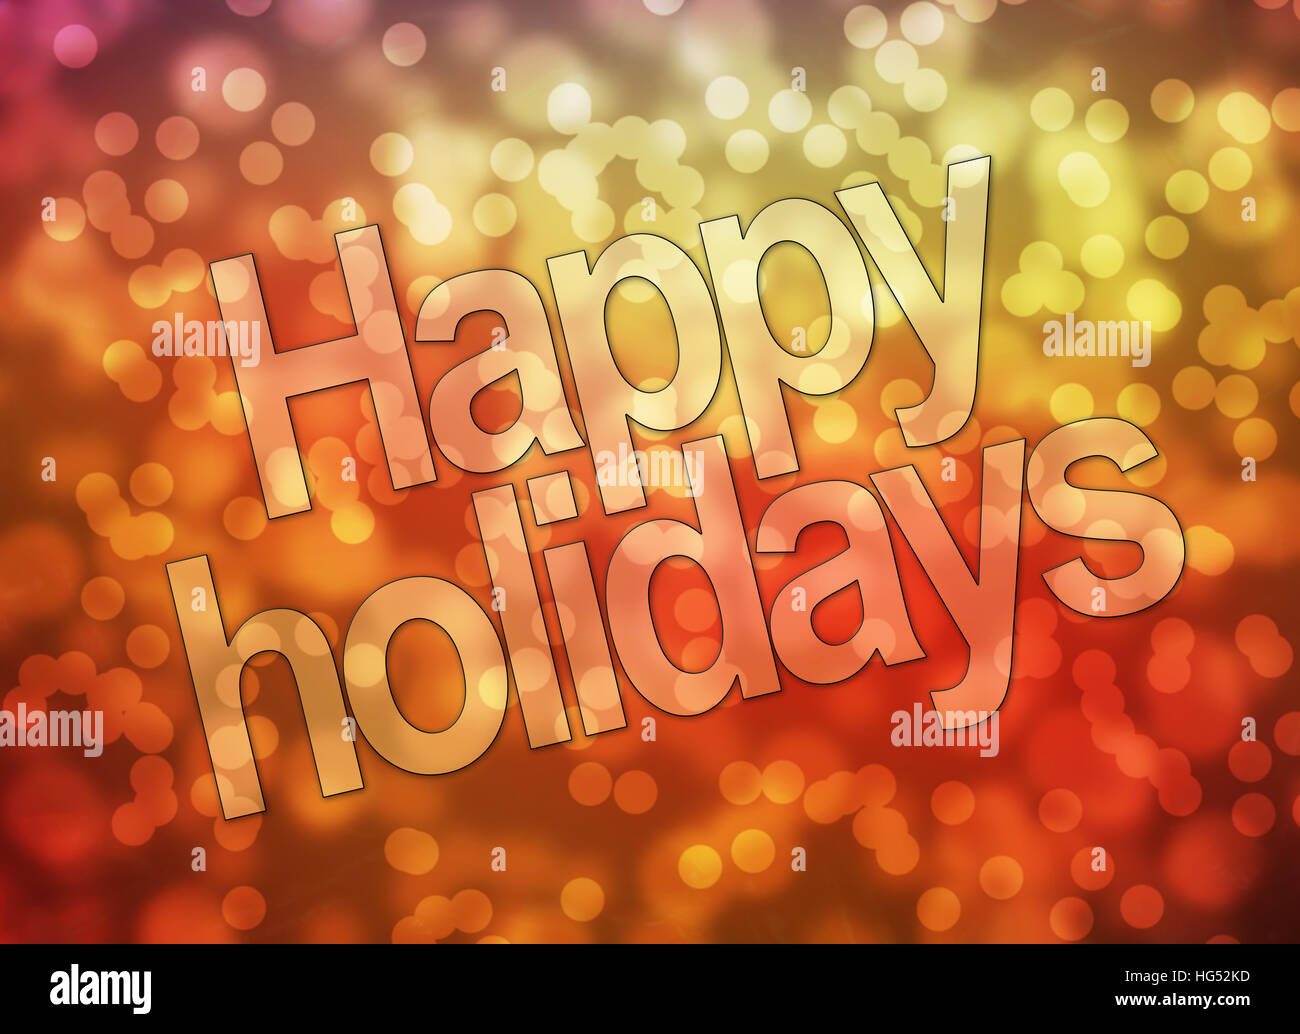 Happy Holidays greetings card with lettering Stock Photo